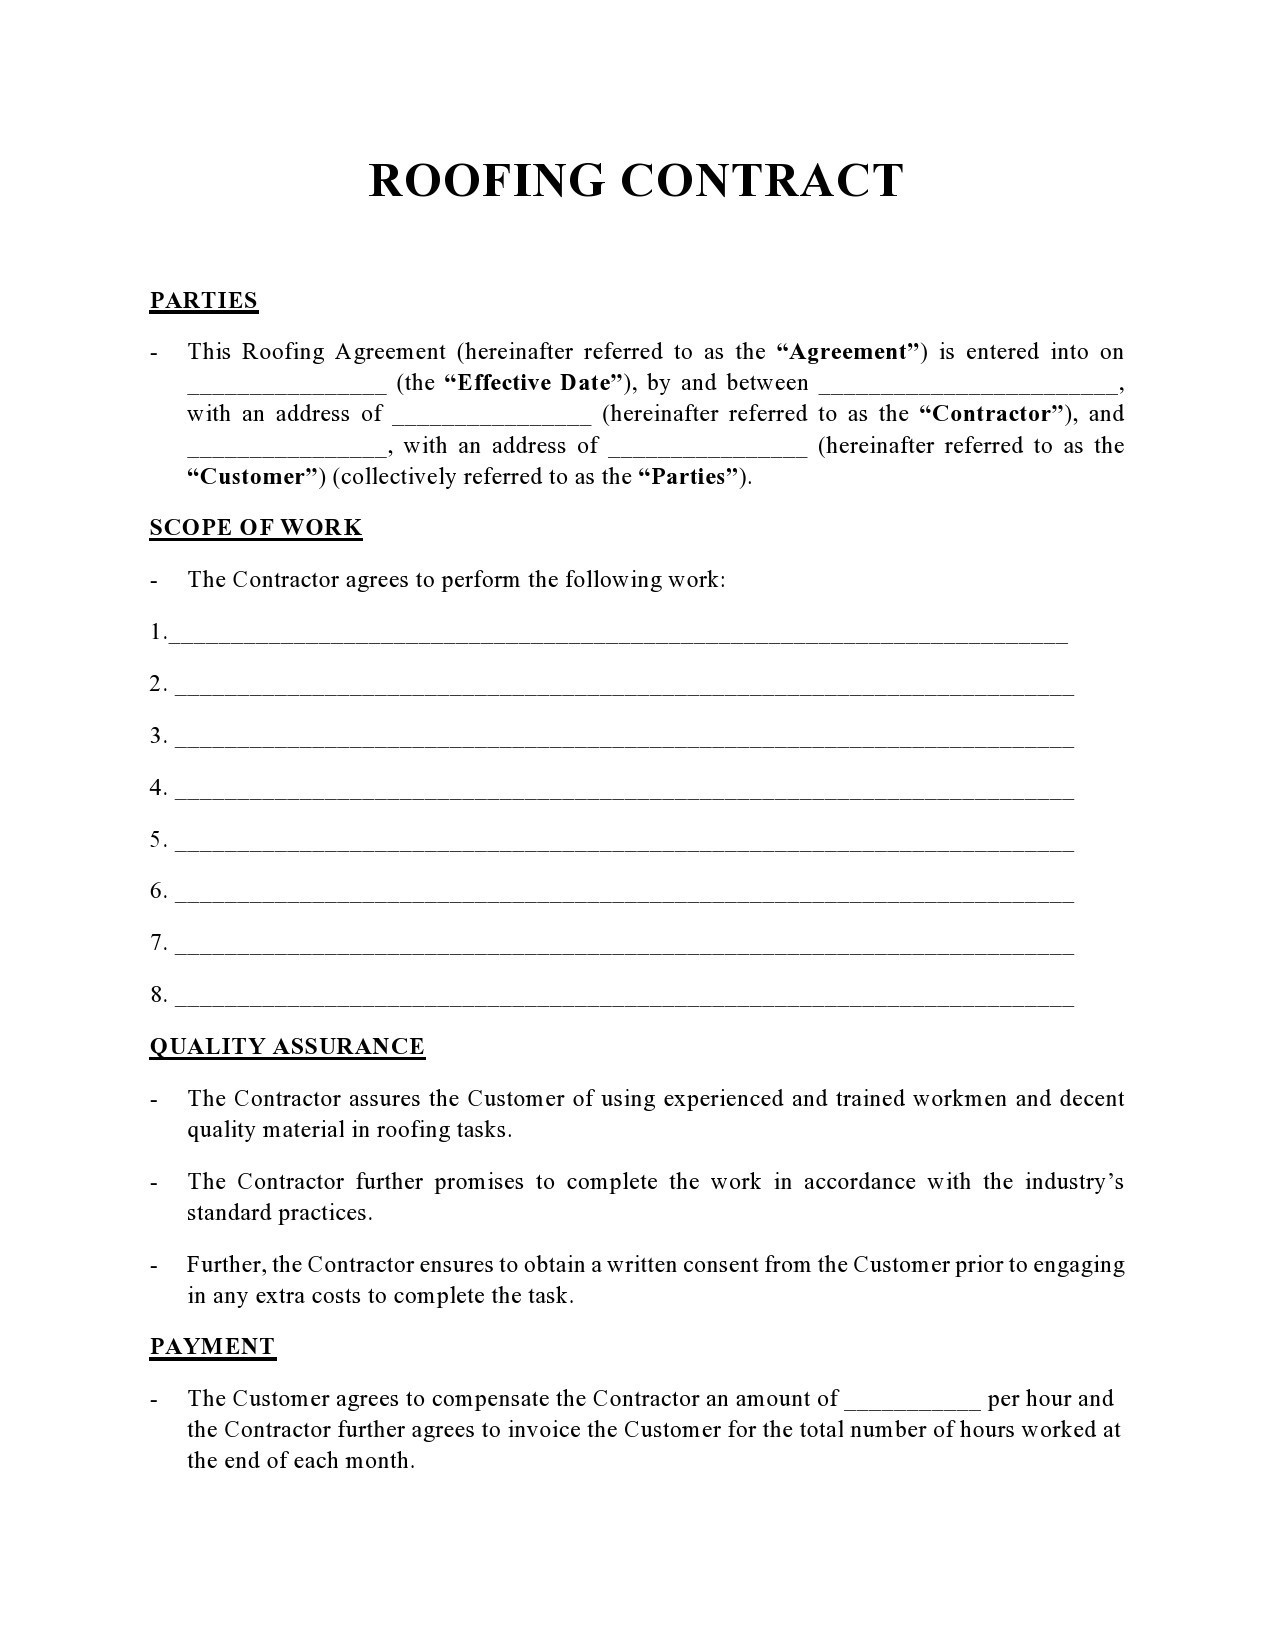 Free roofing contract 28